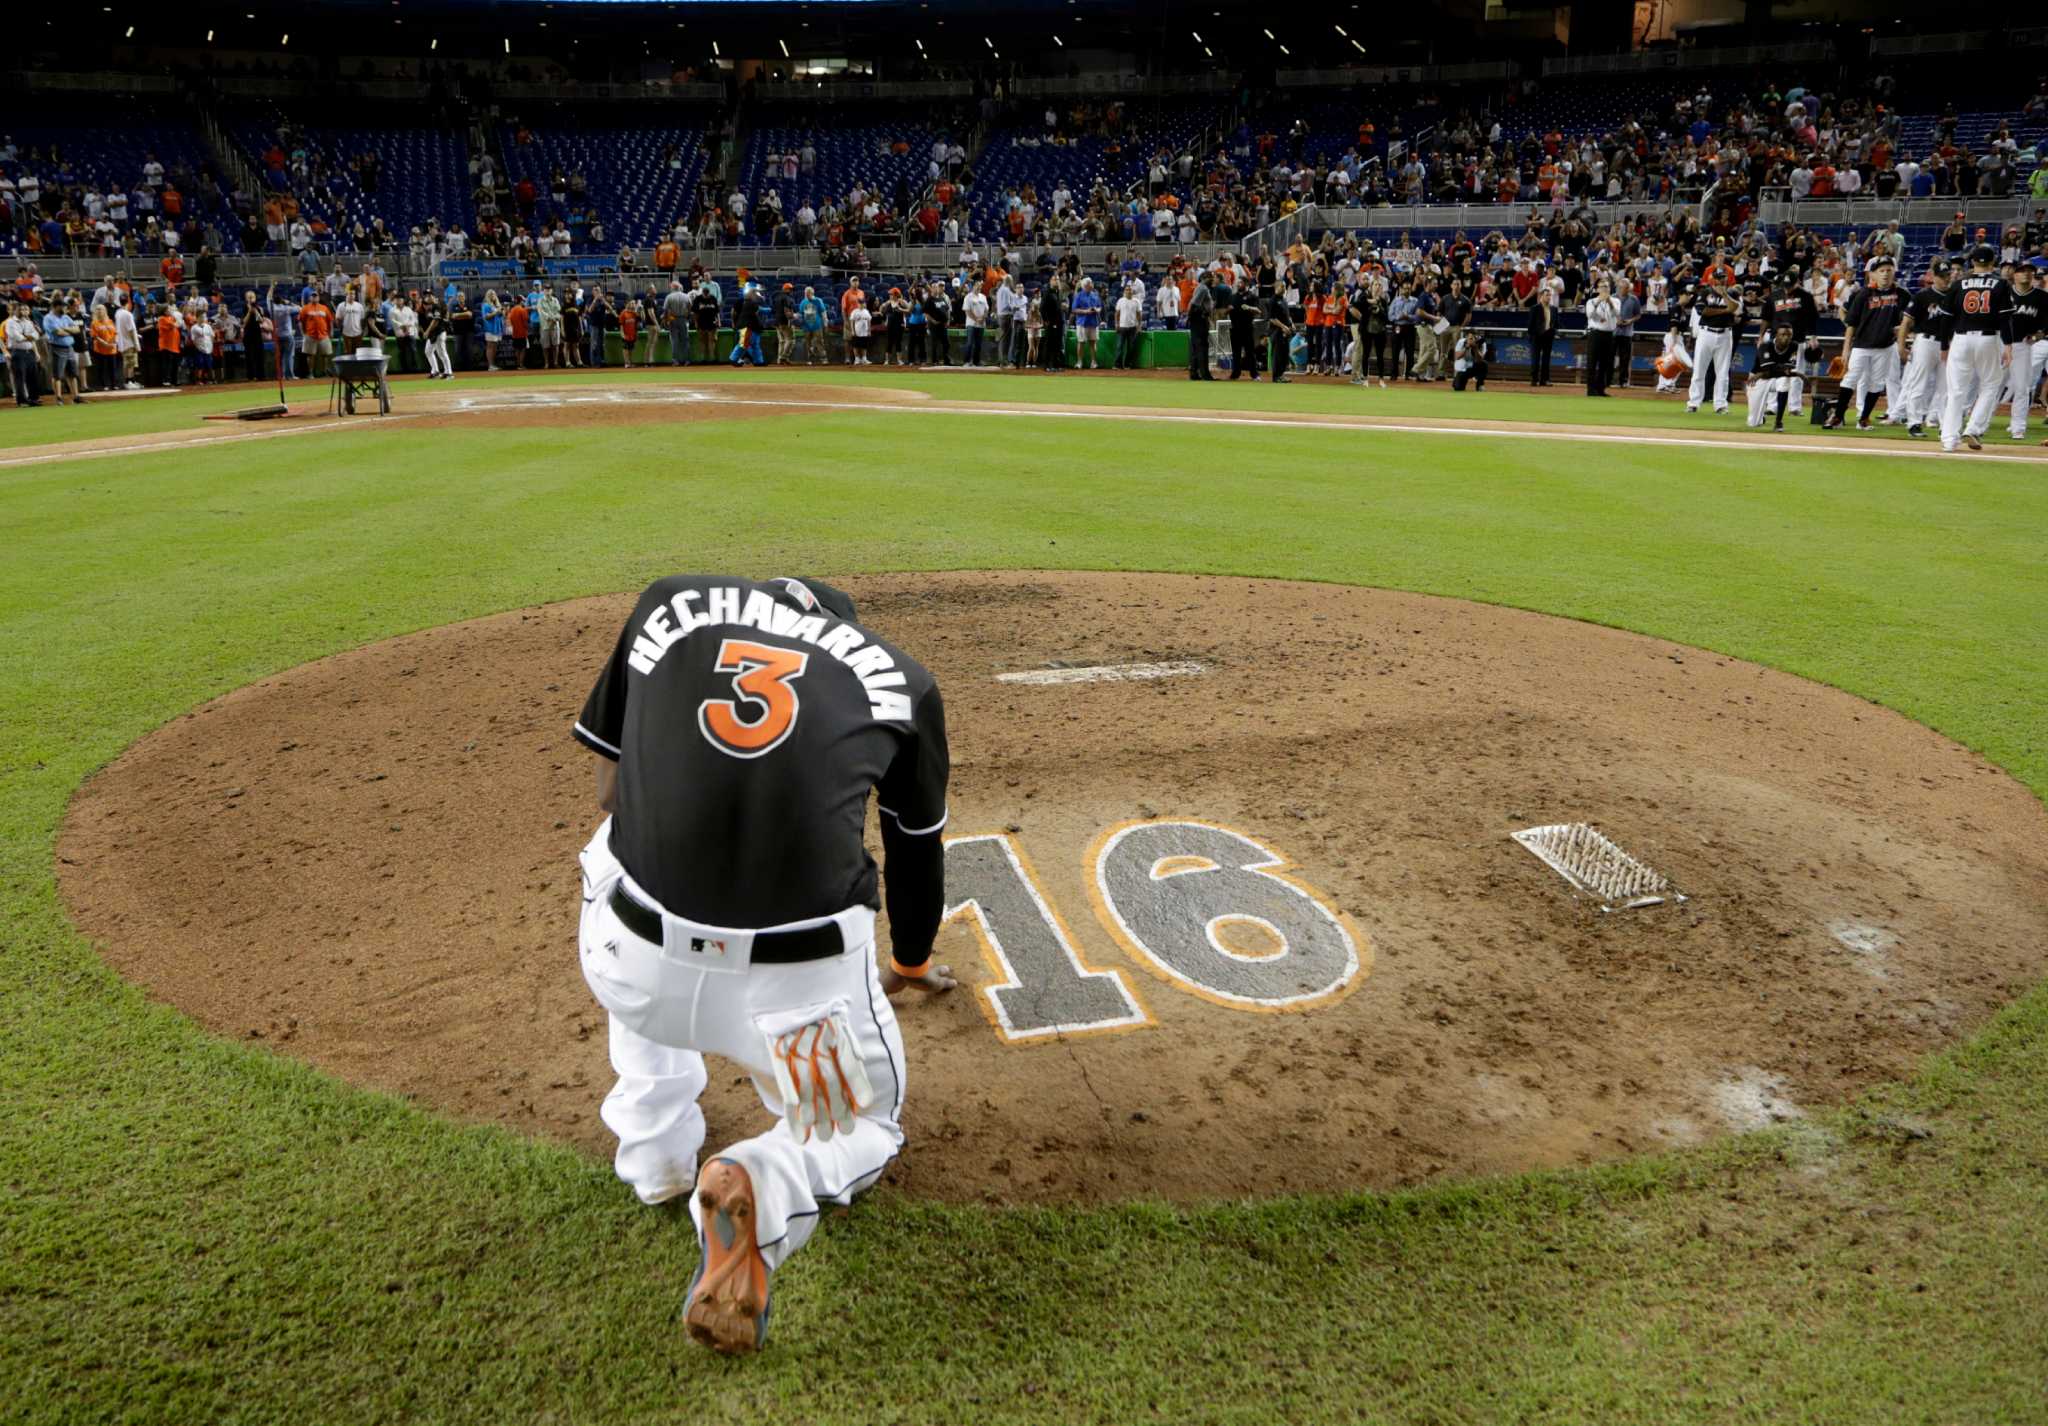 Miami Marlins pitcher Jose Fernandez killed in boating accident